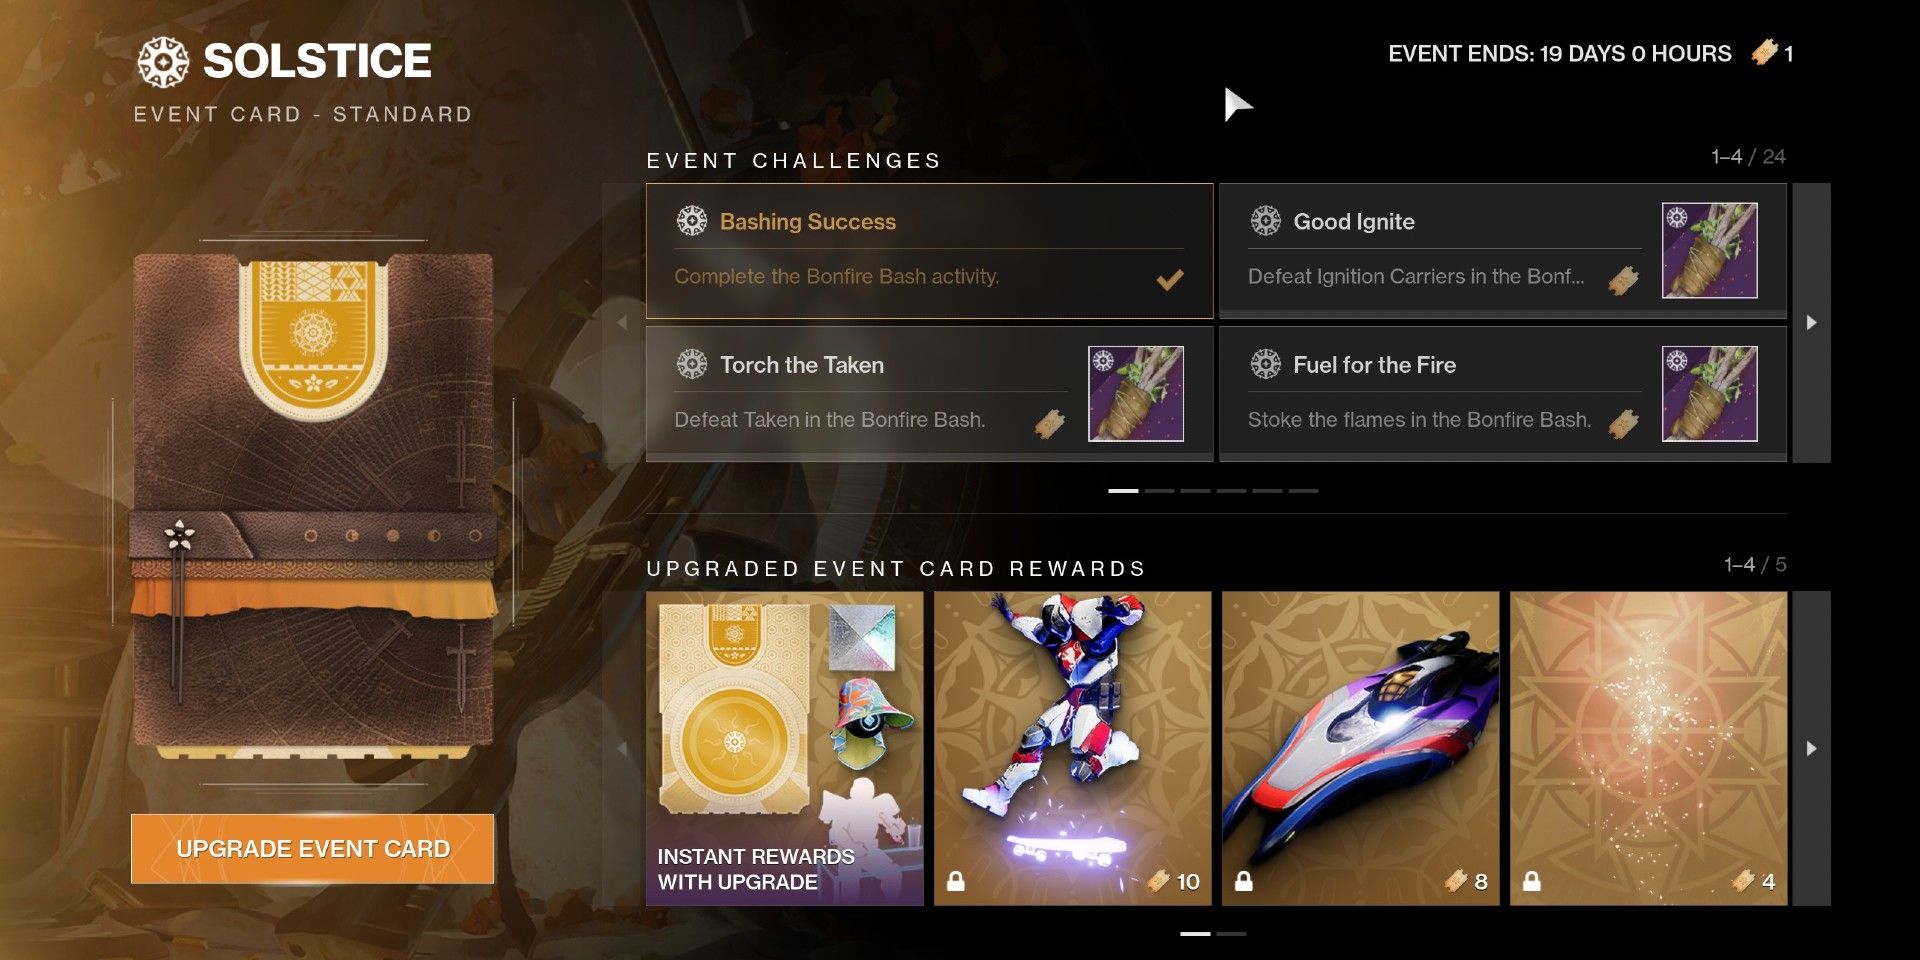 Best Solstice Challenges To Complete First In Destiny 2